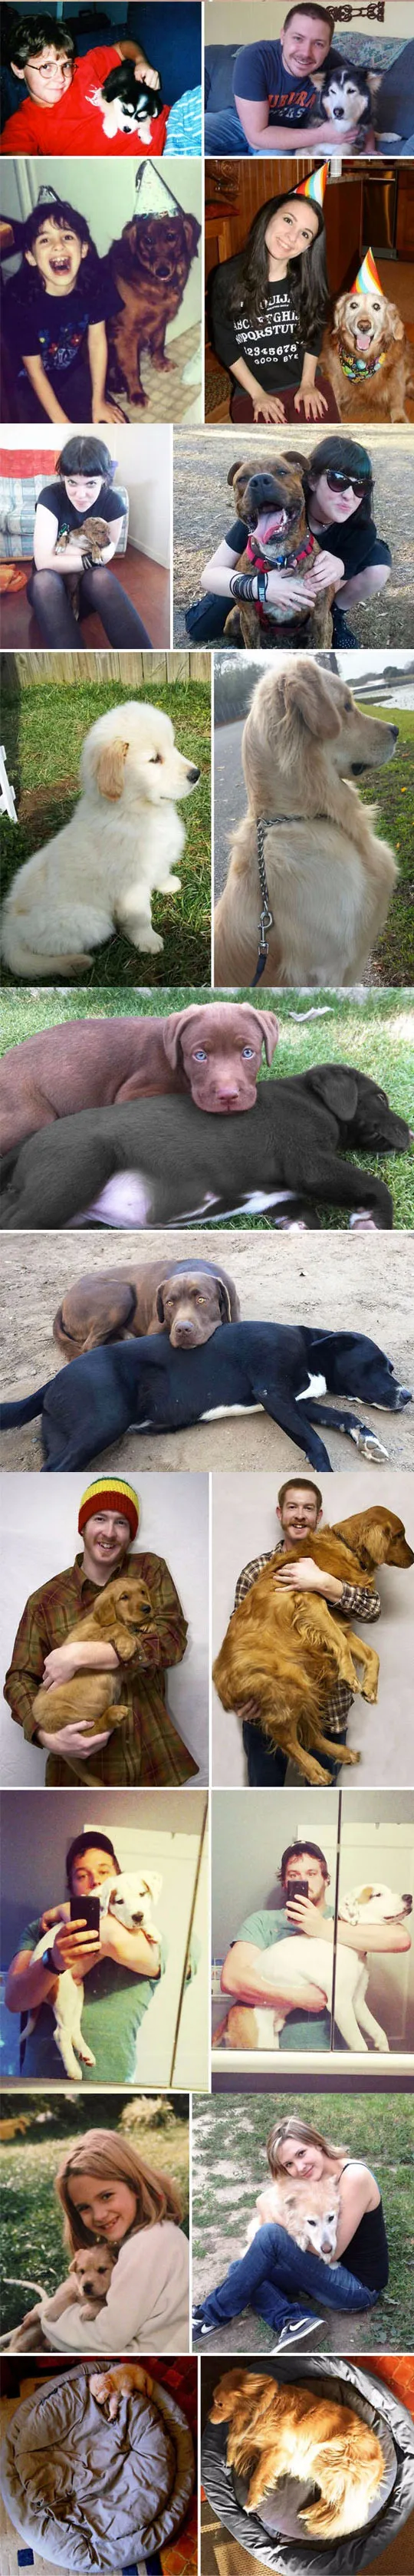 Puppers through the ages